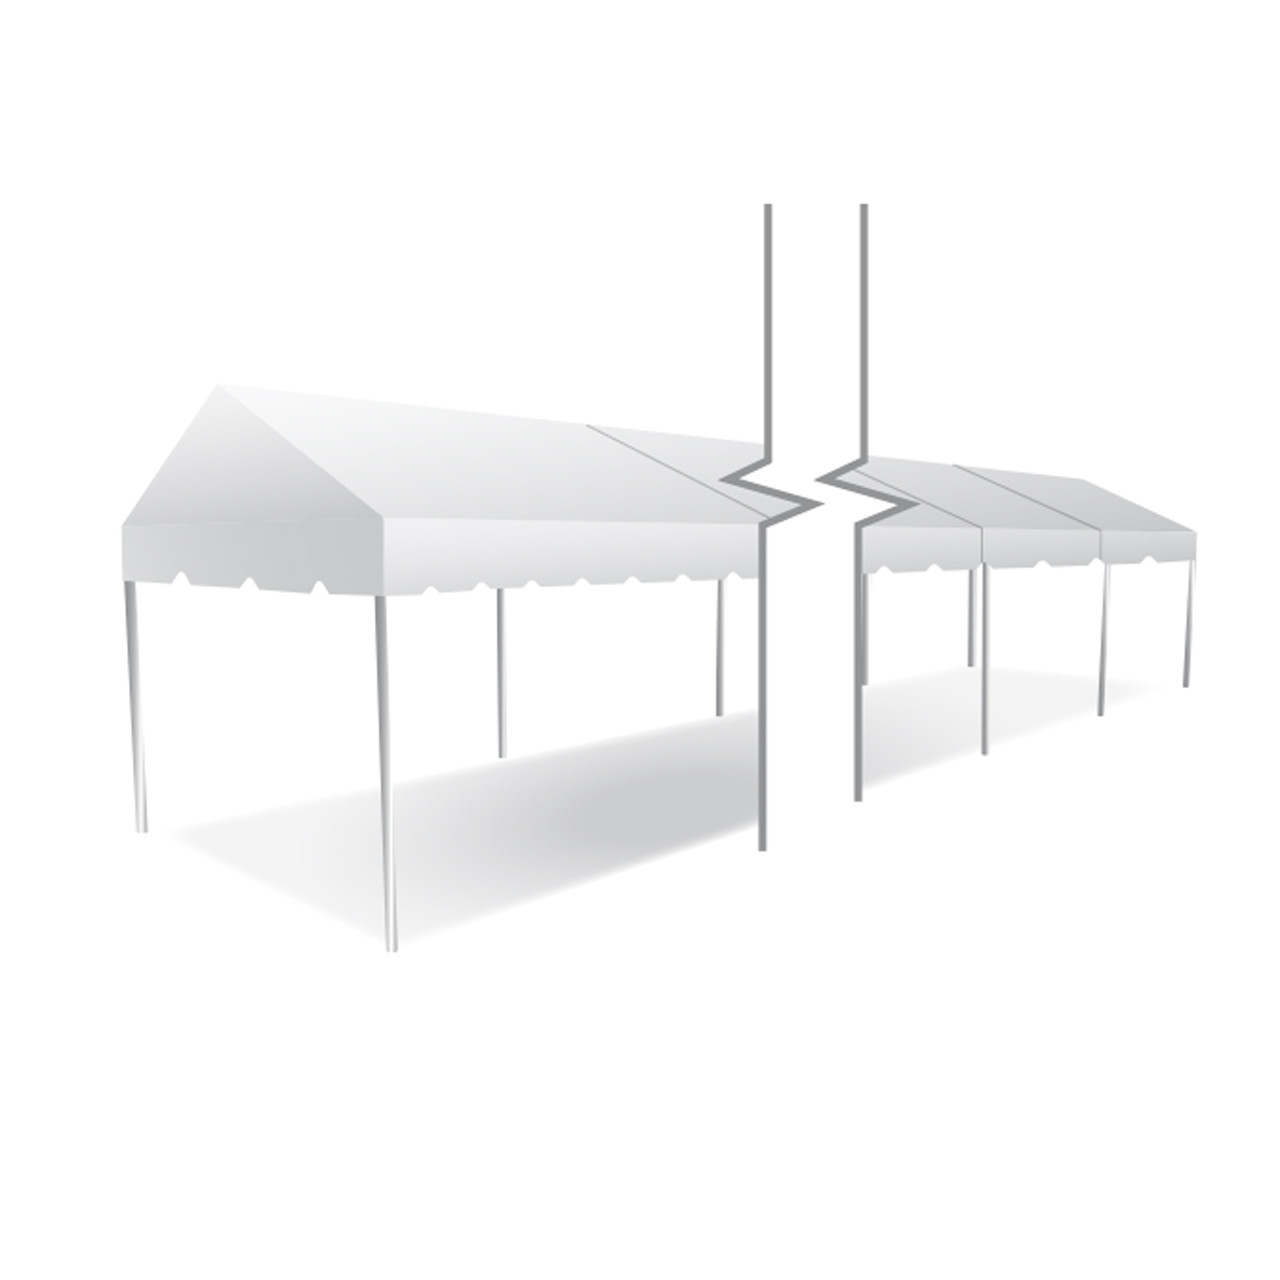 10' x 60' Classic Series Gable End Frame Tent, Sectional Tent Top, Complete